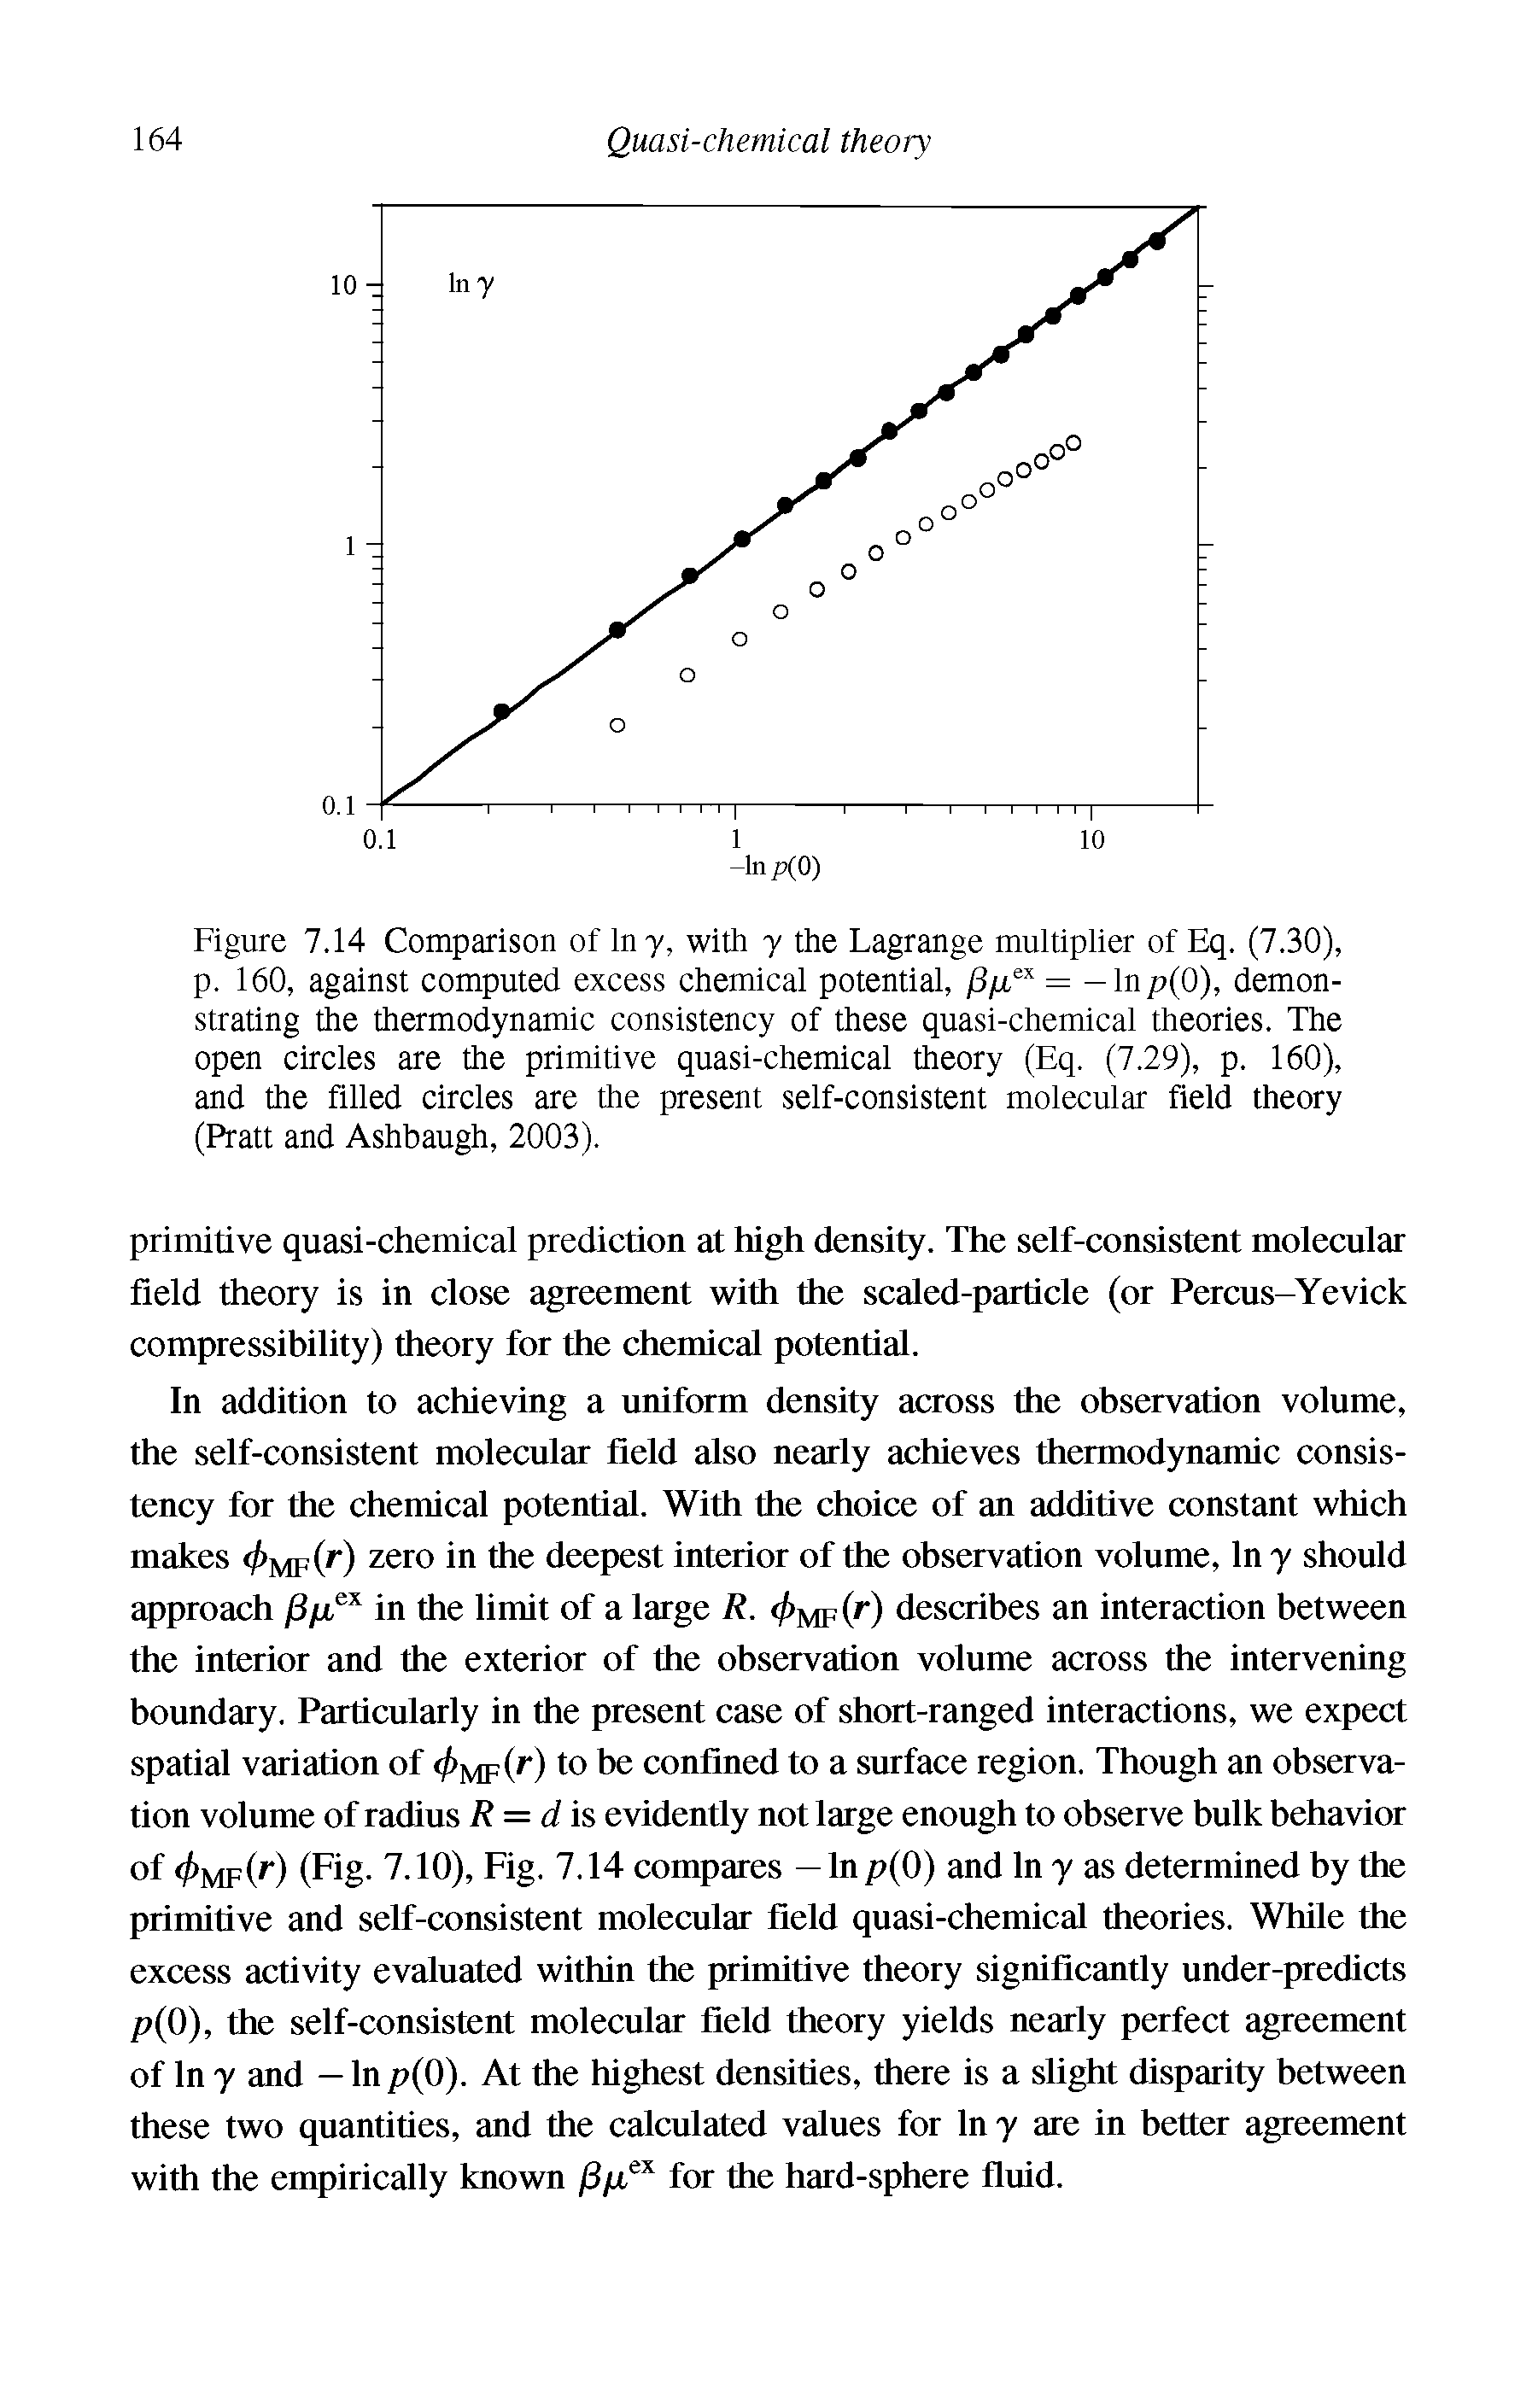 Figure 7.14 Comparison of Iny, with y the Lagrange multiplier of Eq. (7.30), p. 160, against computed excess chemical potential, /3yu = -ln/ (0), demonstrating the thermodynamic consistency of these quasi-chemical theories. The open circles are the primitive quasi-chemical theory (Eq. (7.29), p. 160), and the filled circles are the present self-consistent molecular field theory (Pratt and Ashbaugh, 2003).